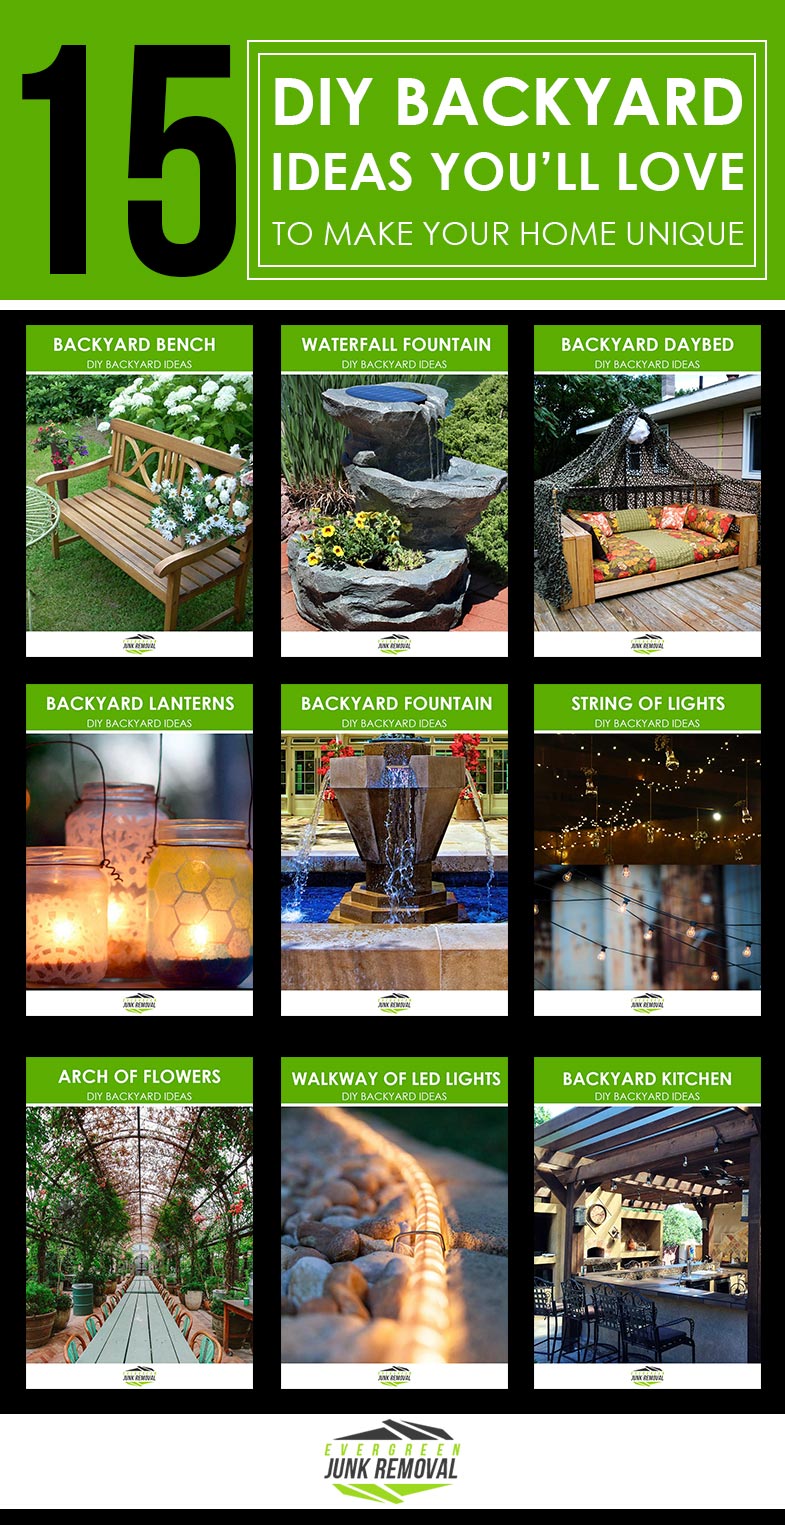 Evergreen Junk Removal Service - DIY Backyard Ideas To Make Your Home Even More Beautiful.